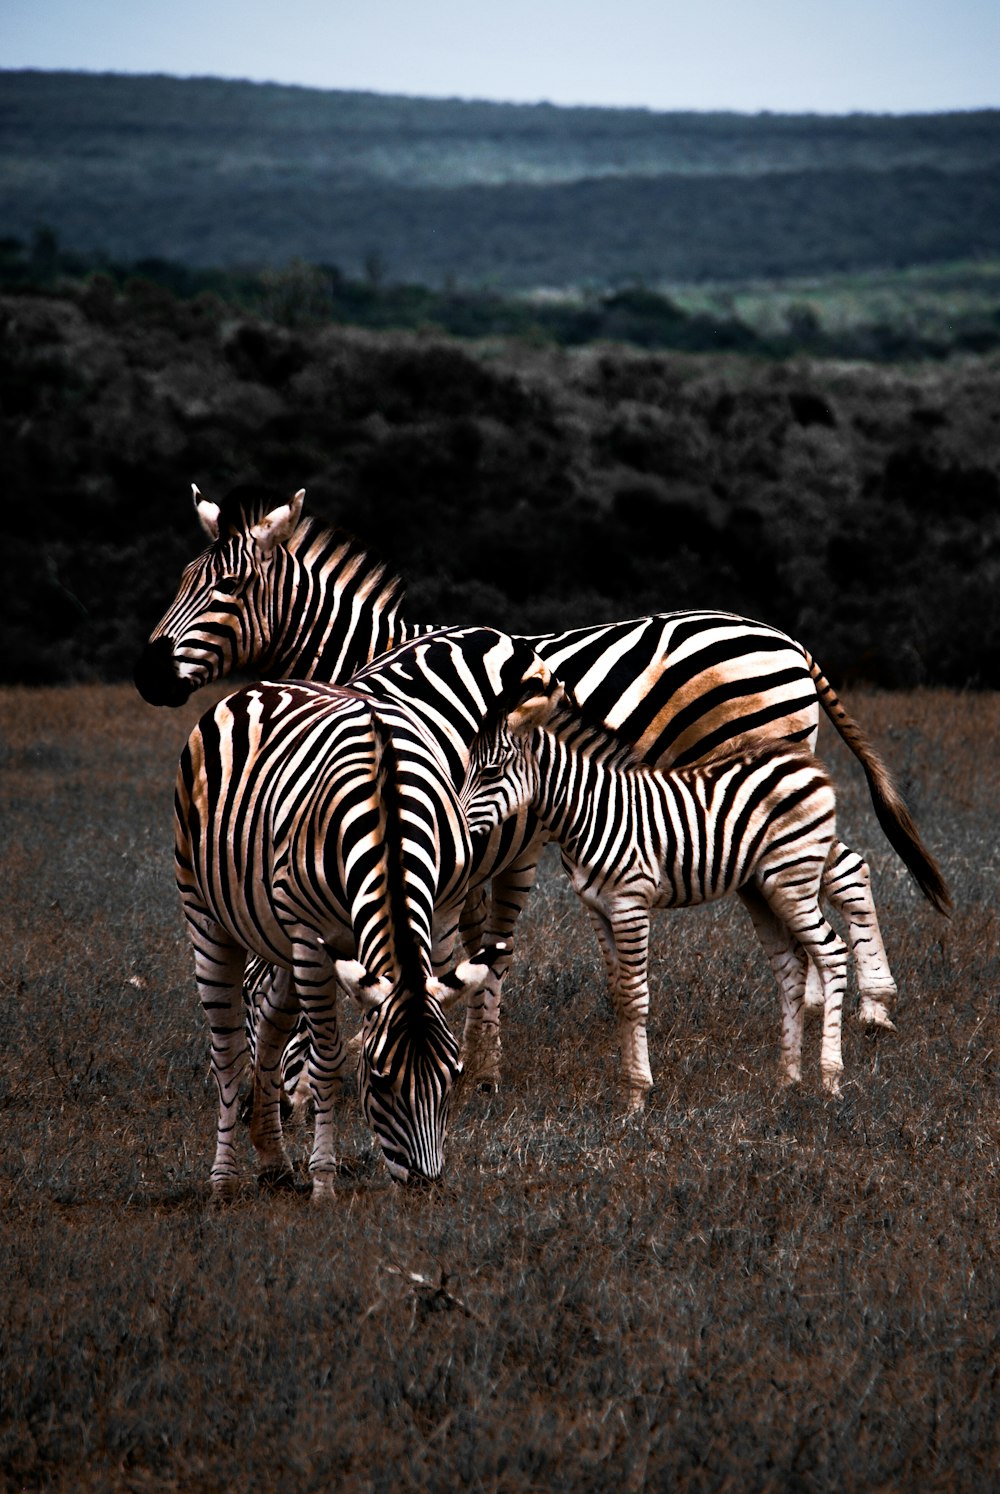 black and white zebra walking on brown field during daytime